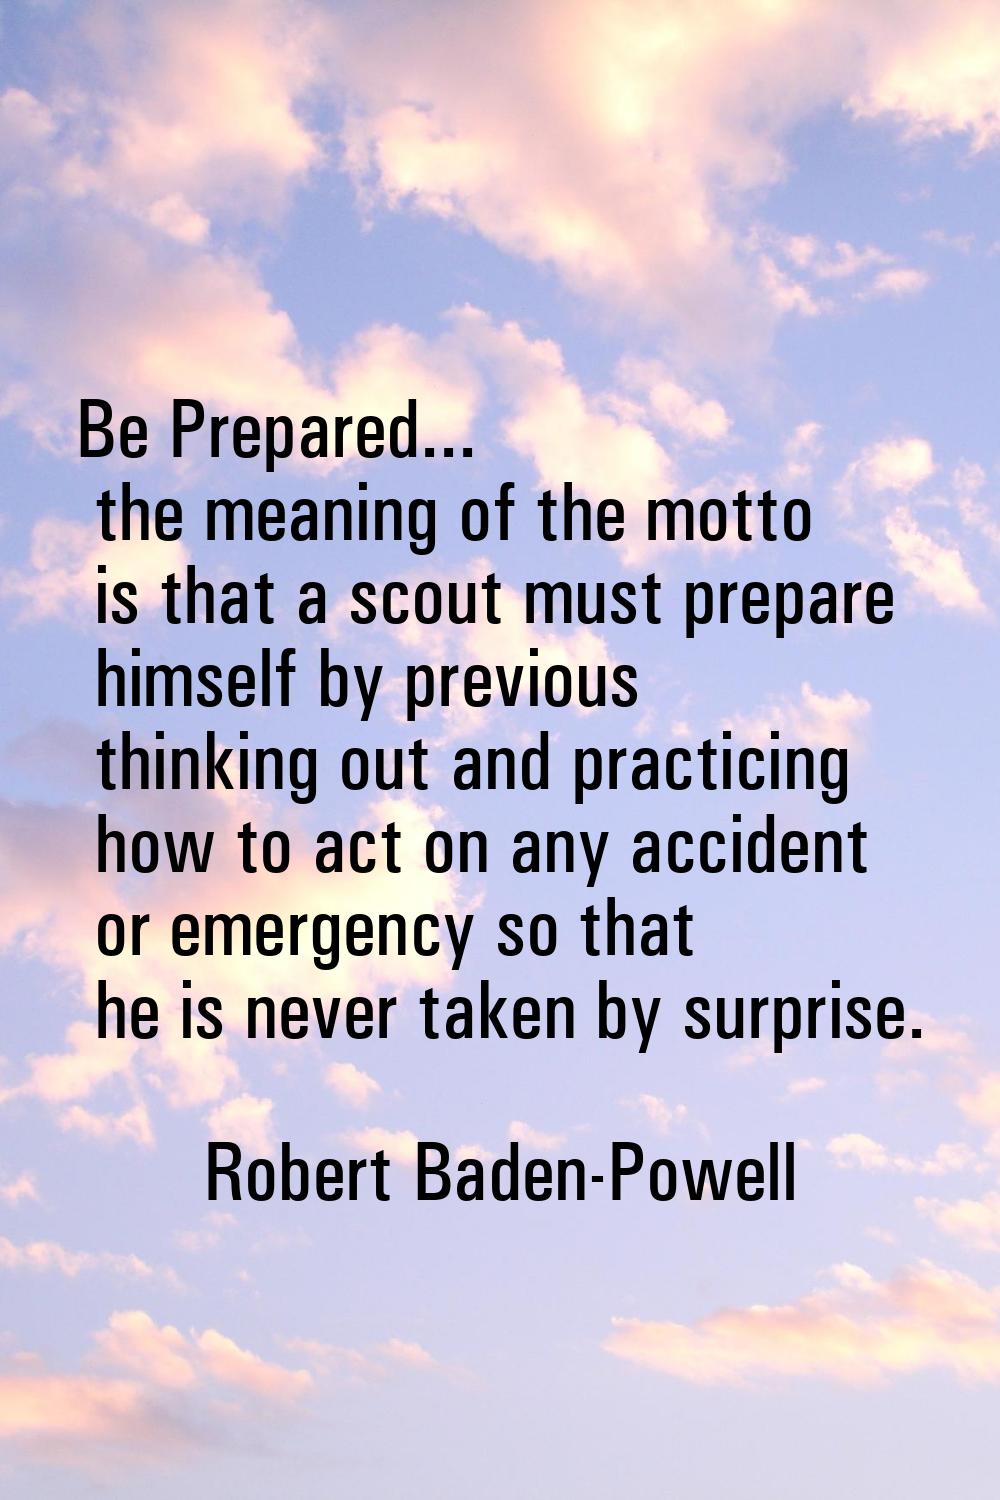 Be Prepared... the meaning of the motto is that a scout must prepare himself by previous thinking o